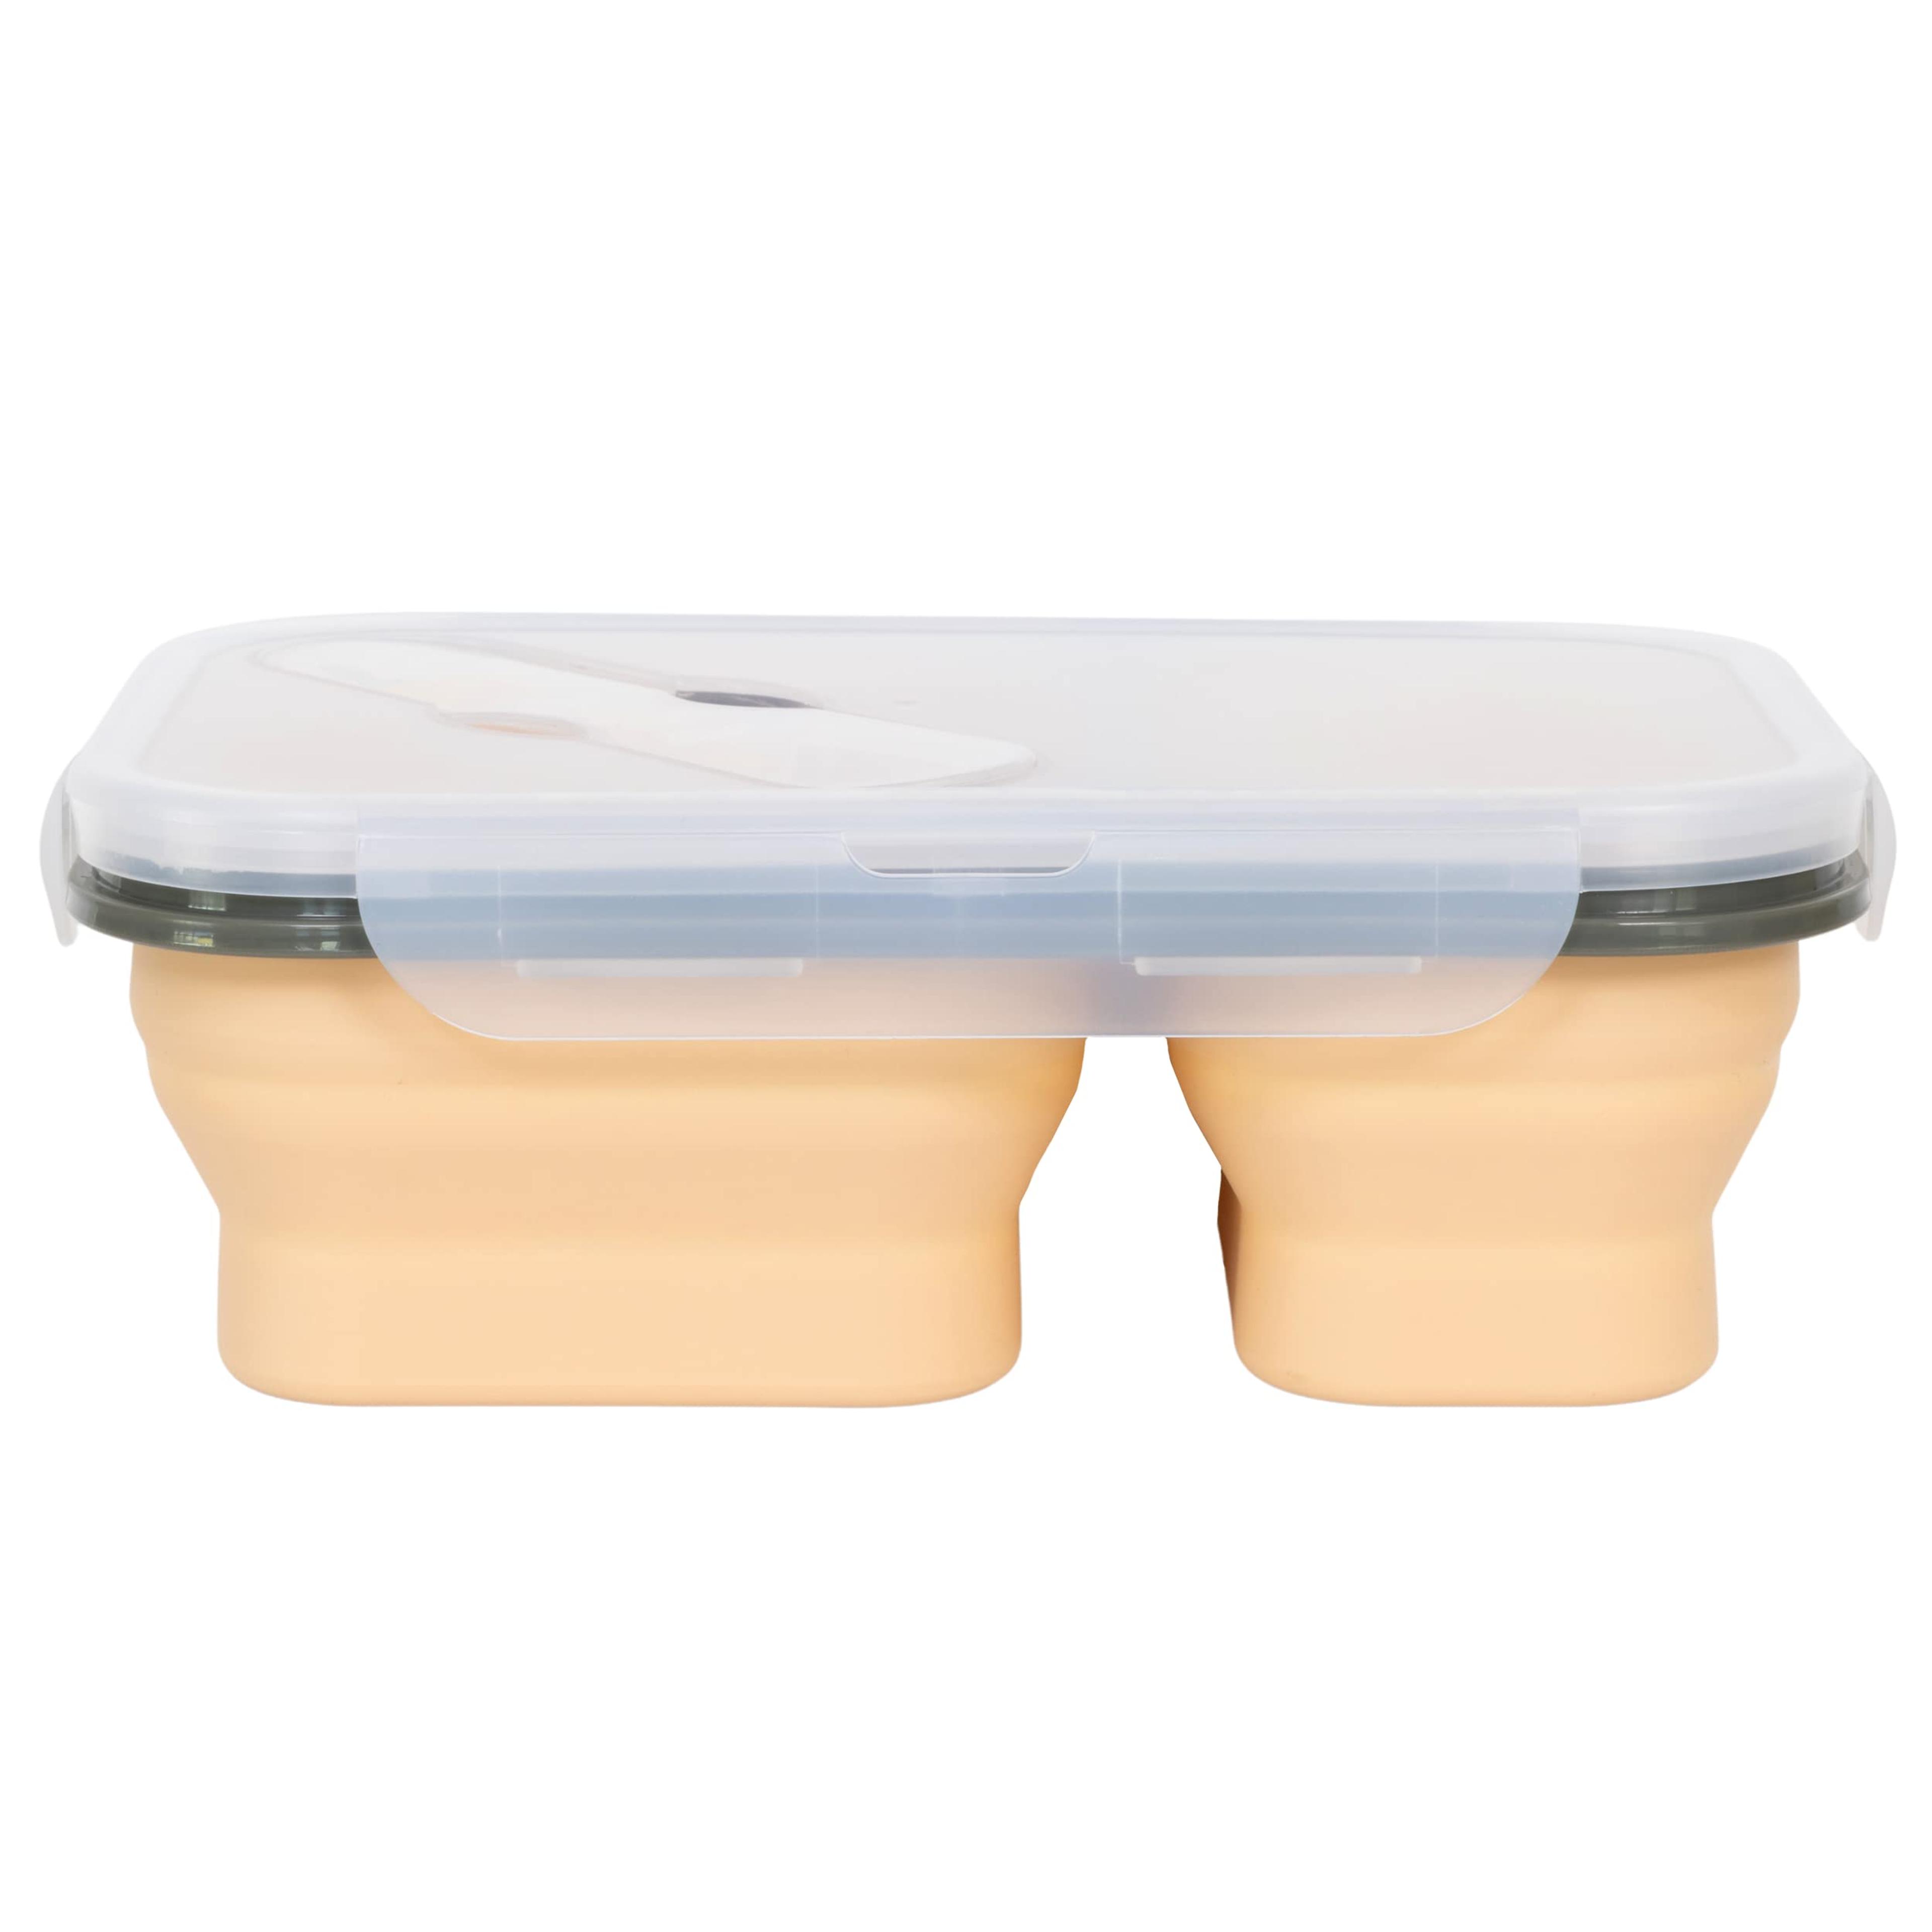 Amazon.com: ModernHome Maven Silicone - Collapsible - BPA Free - Leak Proof - 2 Compartments - Lunch Box - Storage Container - Bento Box - Dishwasher, Microwave Safe - Mauve Beige -1PC: Home & Kitchen